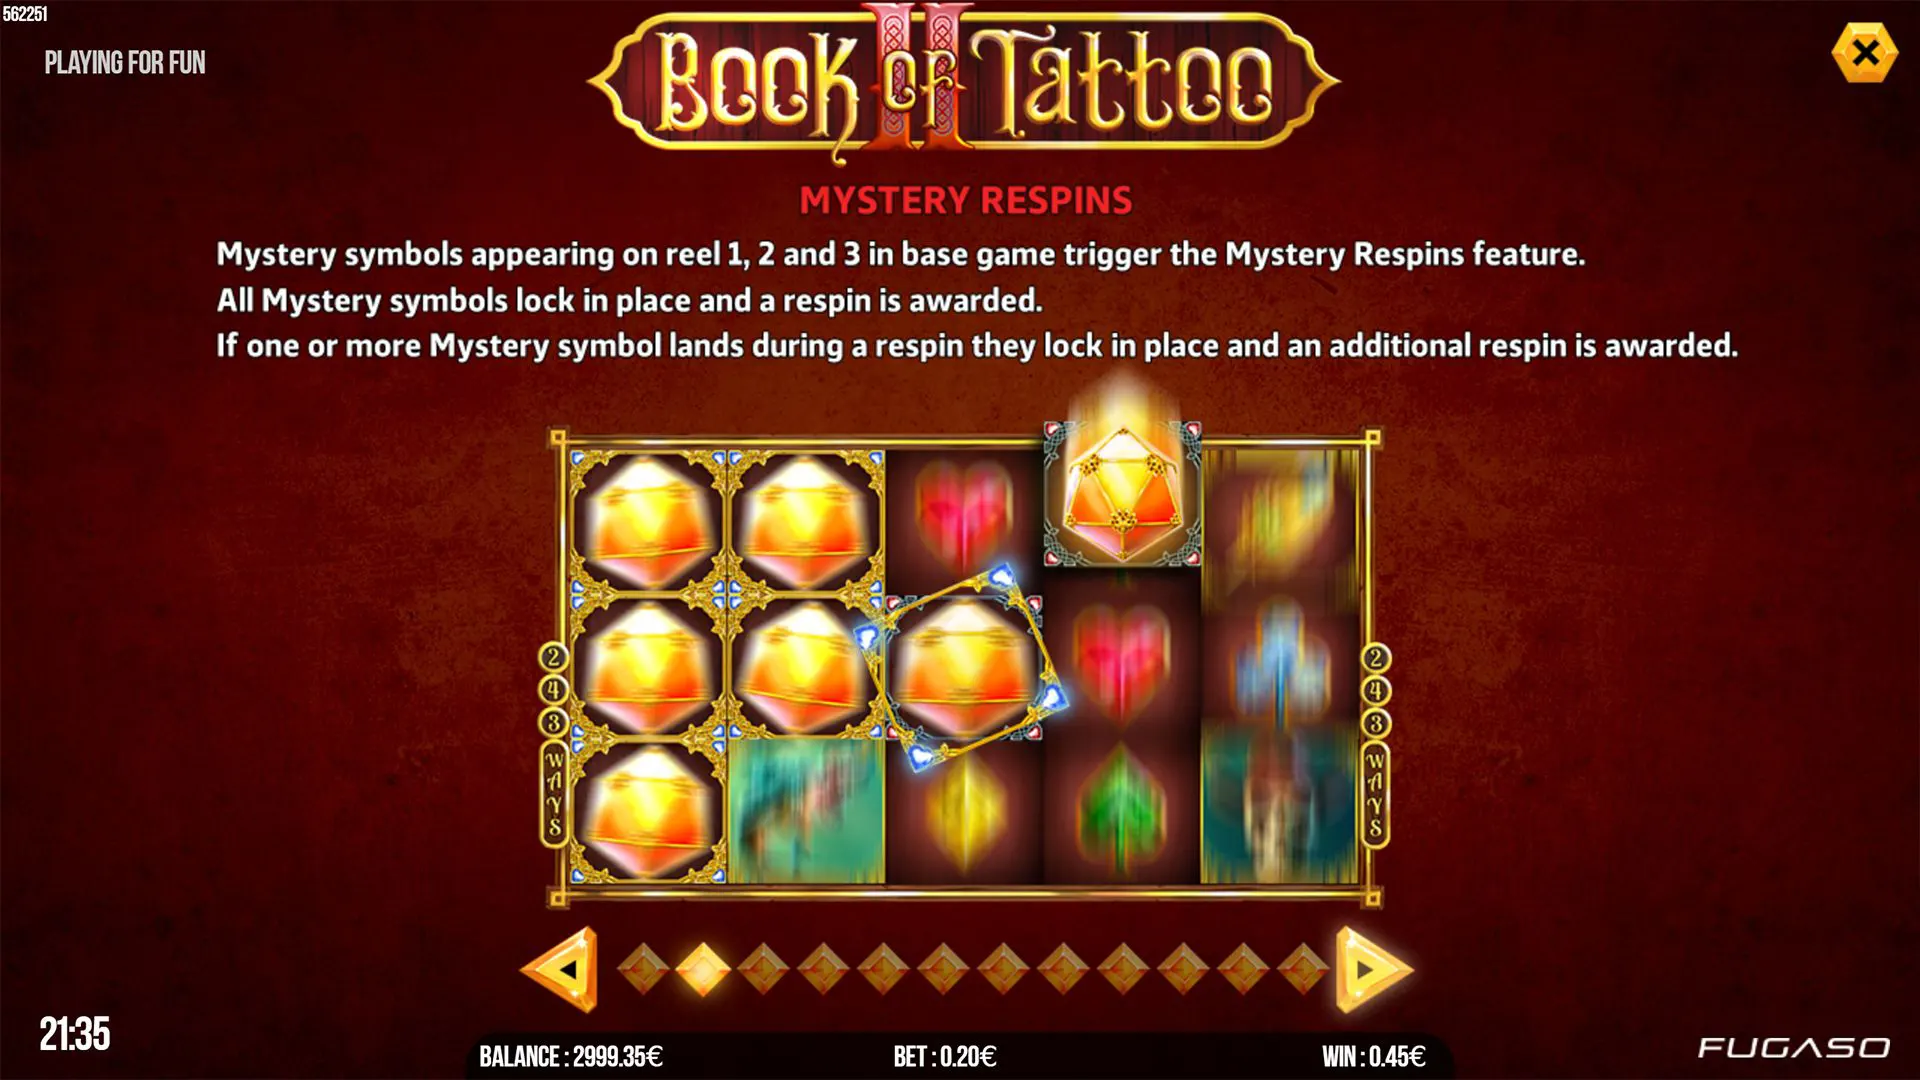 Book of Tattoo 2 Mystery Respins